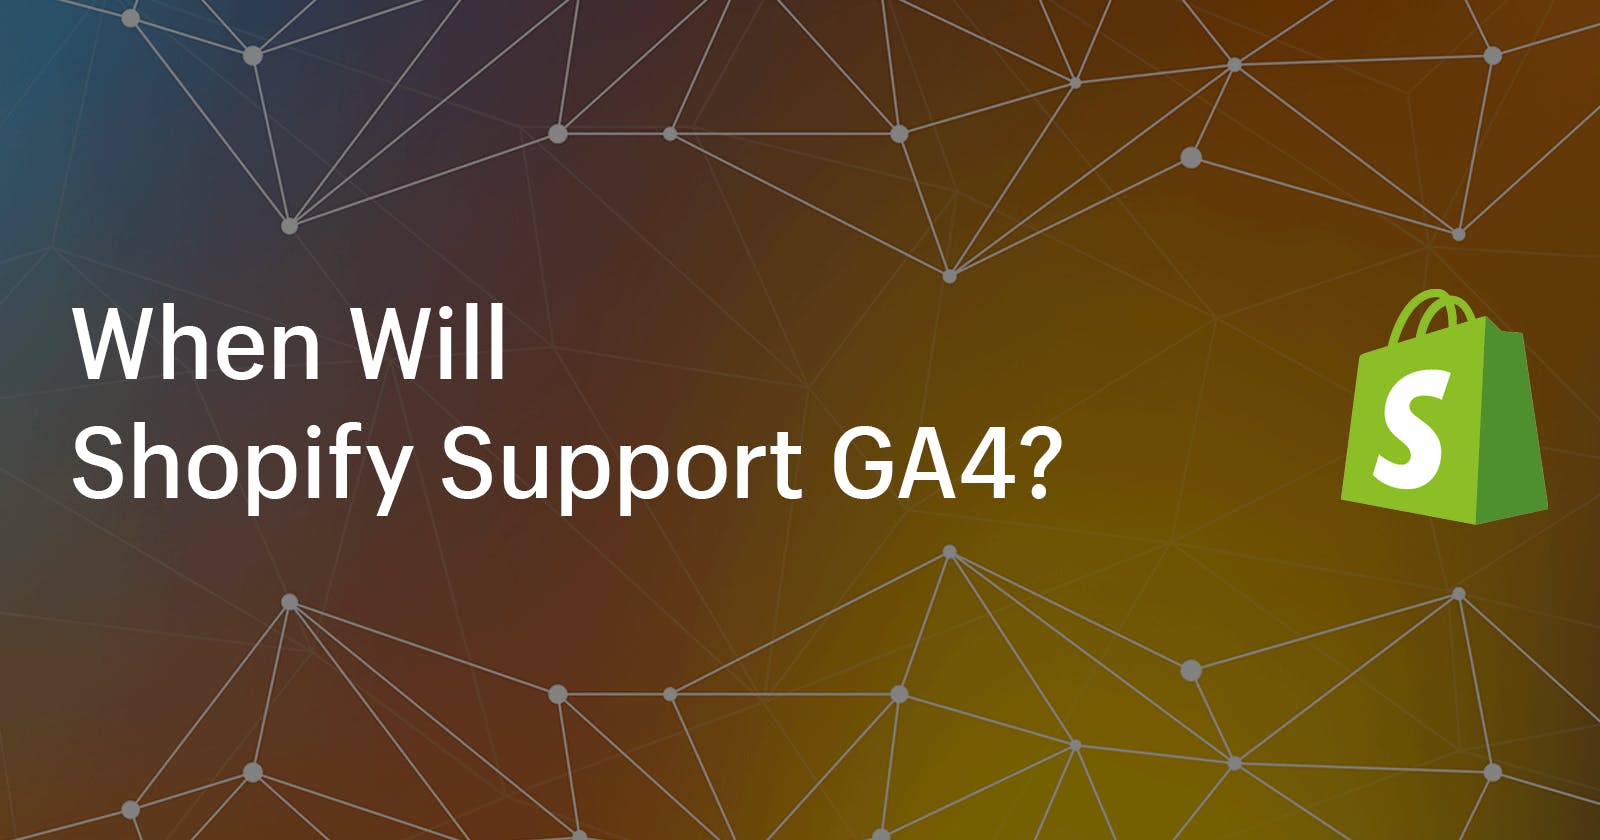 When Will Shopify Support GA4?